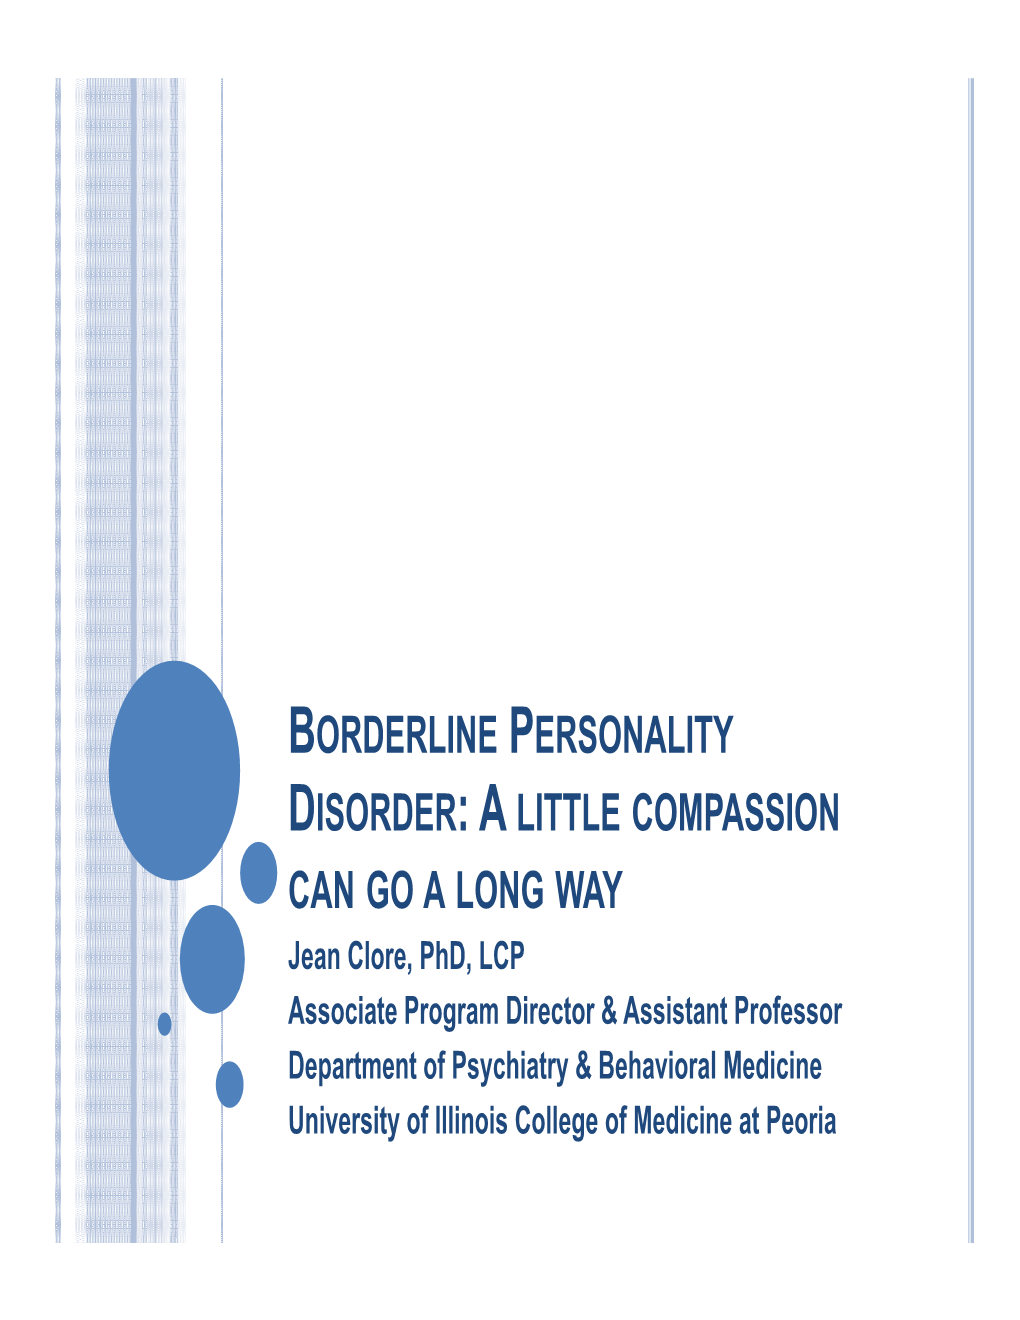 Borderline Personality Disorder: a Little Compassion